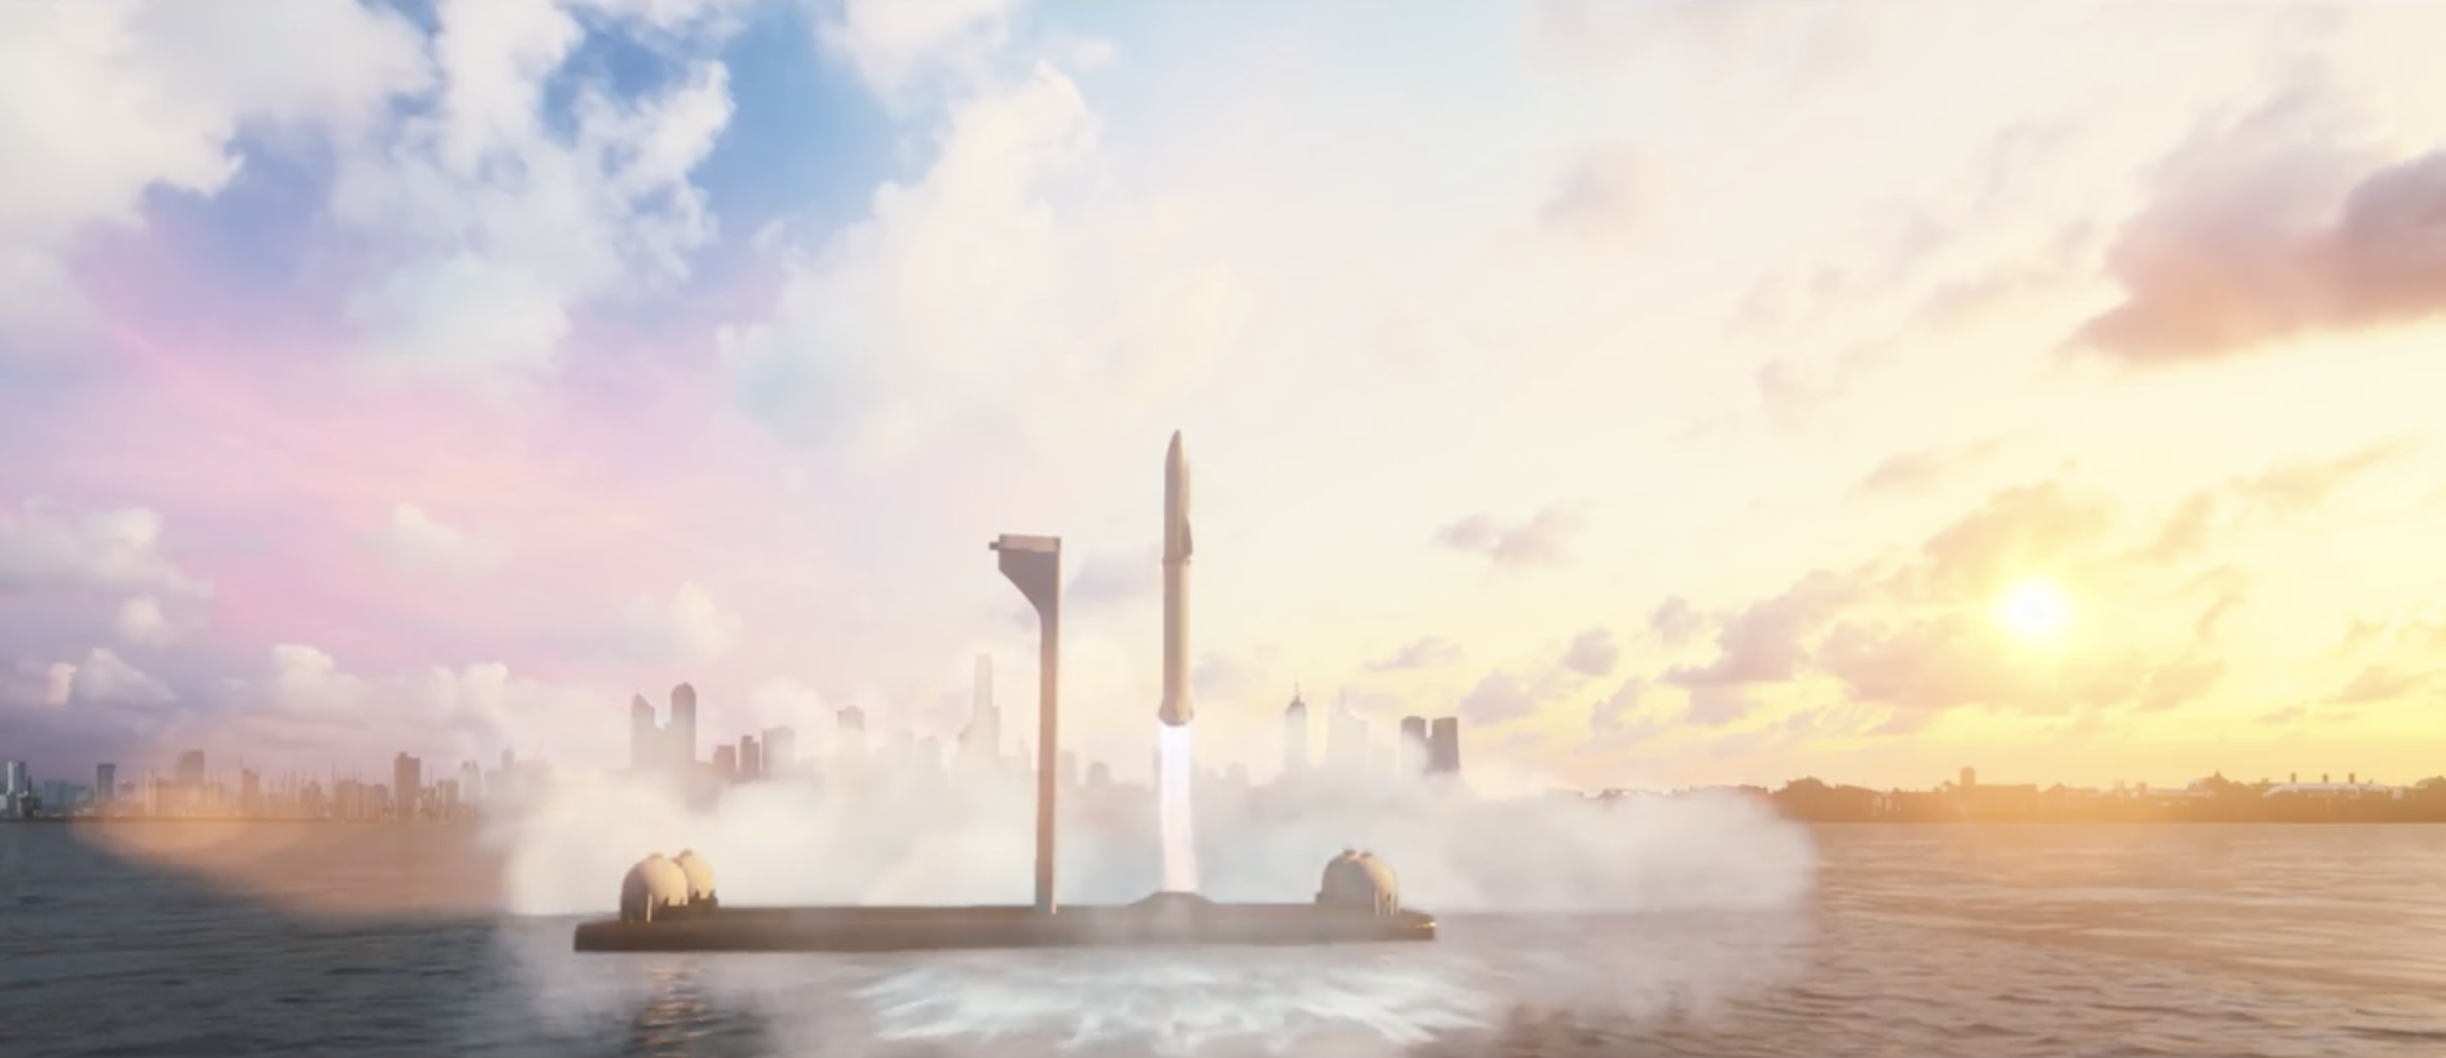 SpaceX's goal for point-to-point travel